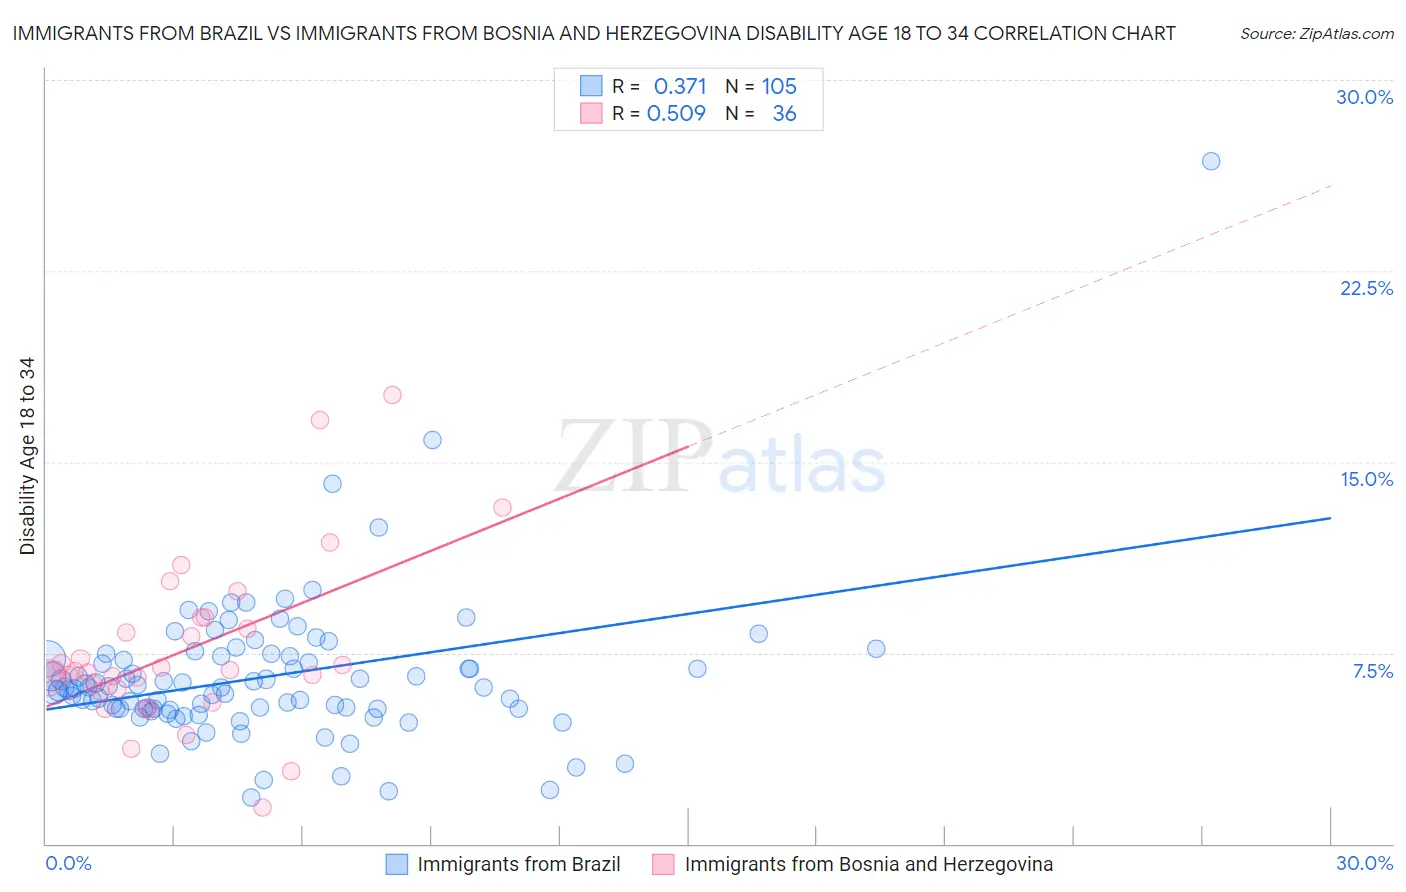 Immigrants from Brazil vs Immigrants from Bosnia and Herzegovina Disability Age 18 to 34